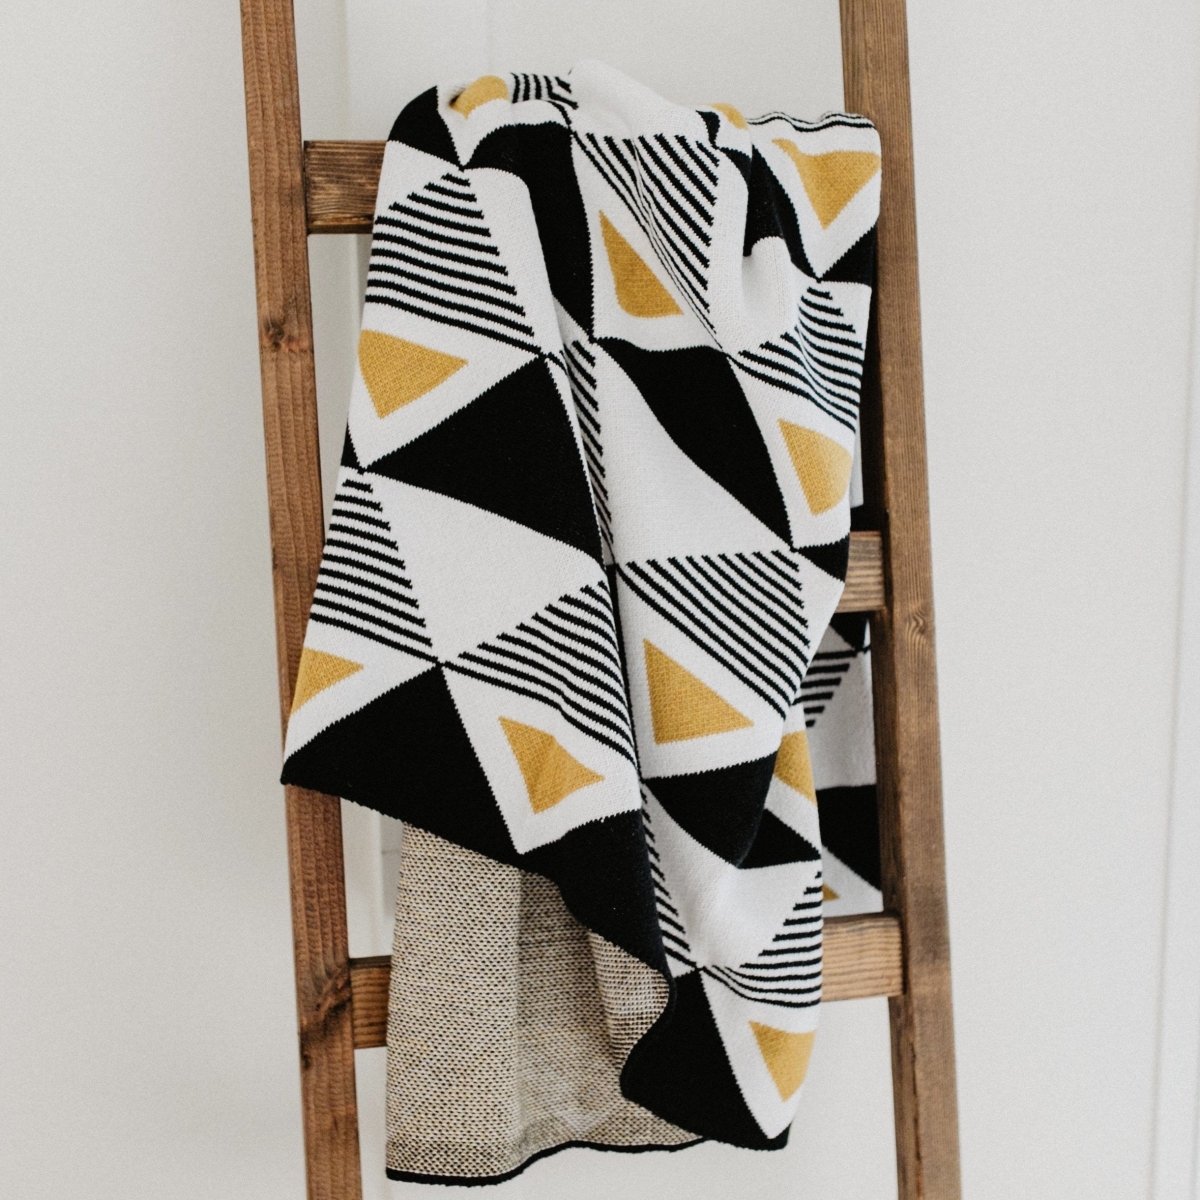 A black, yellow and white geometric patterned throw blanket. Designed by Seek & Swoon in Portland, OR and made in the USA.